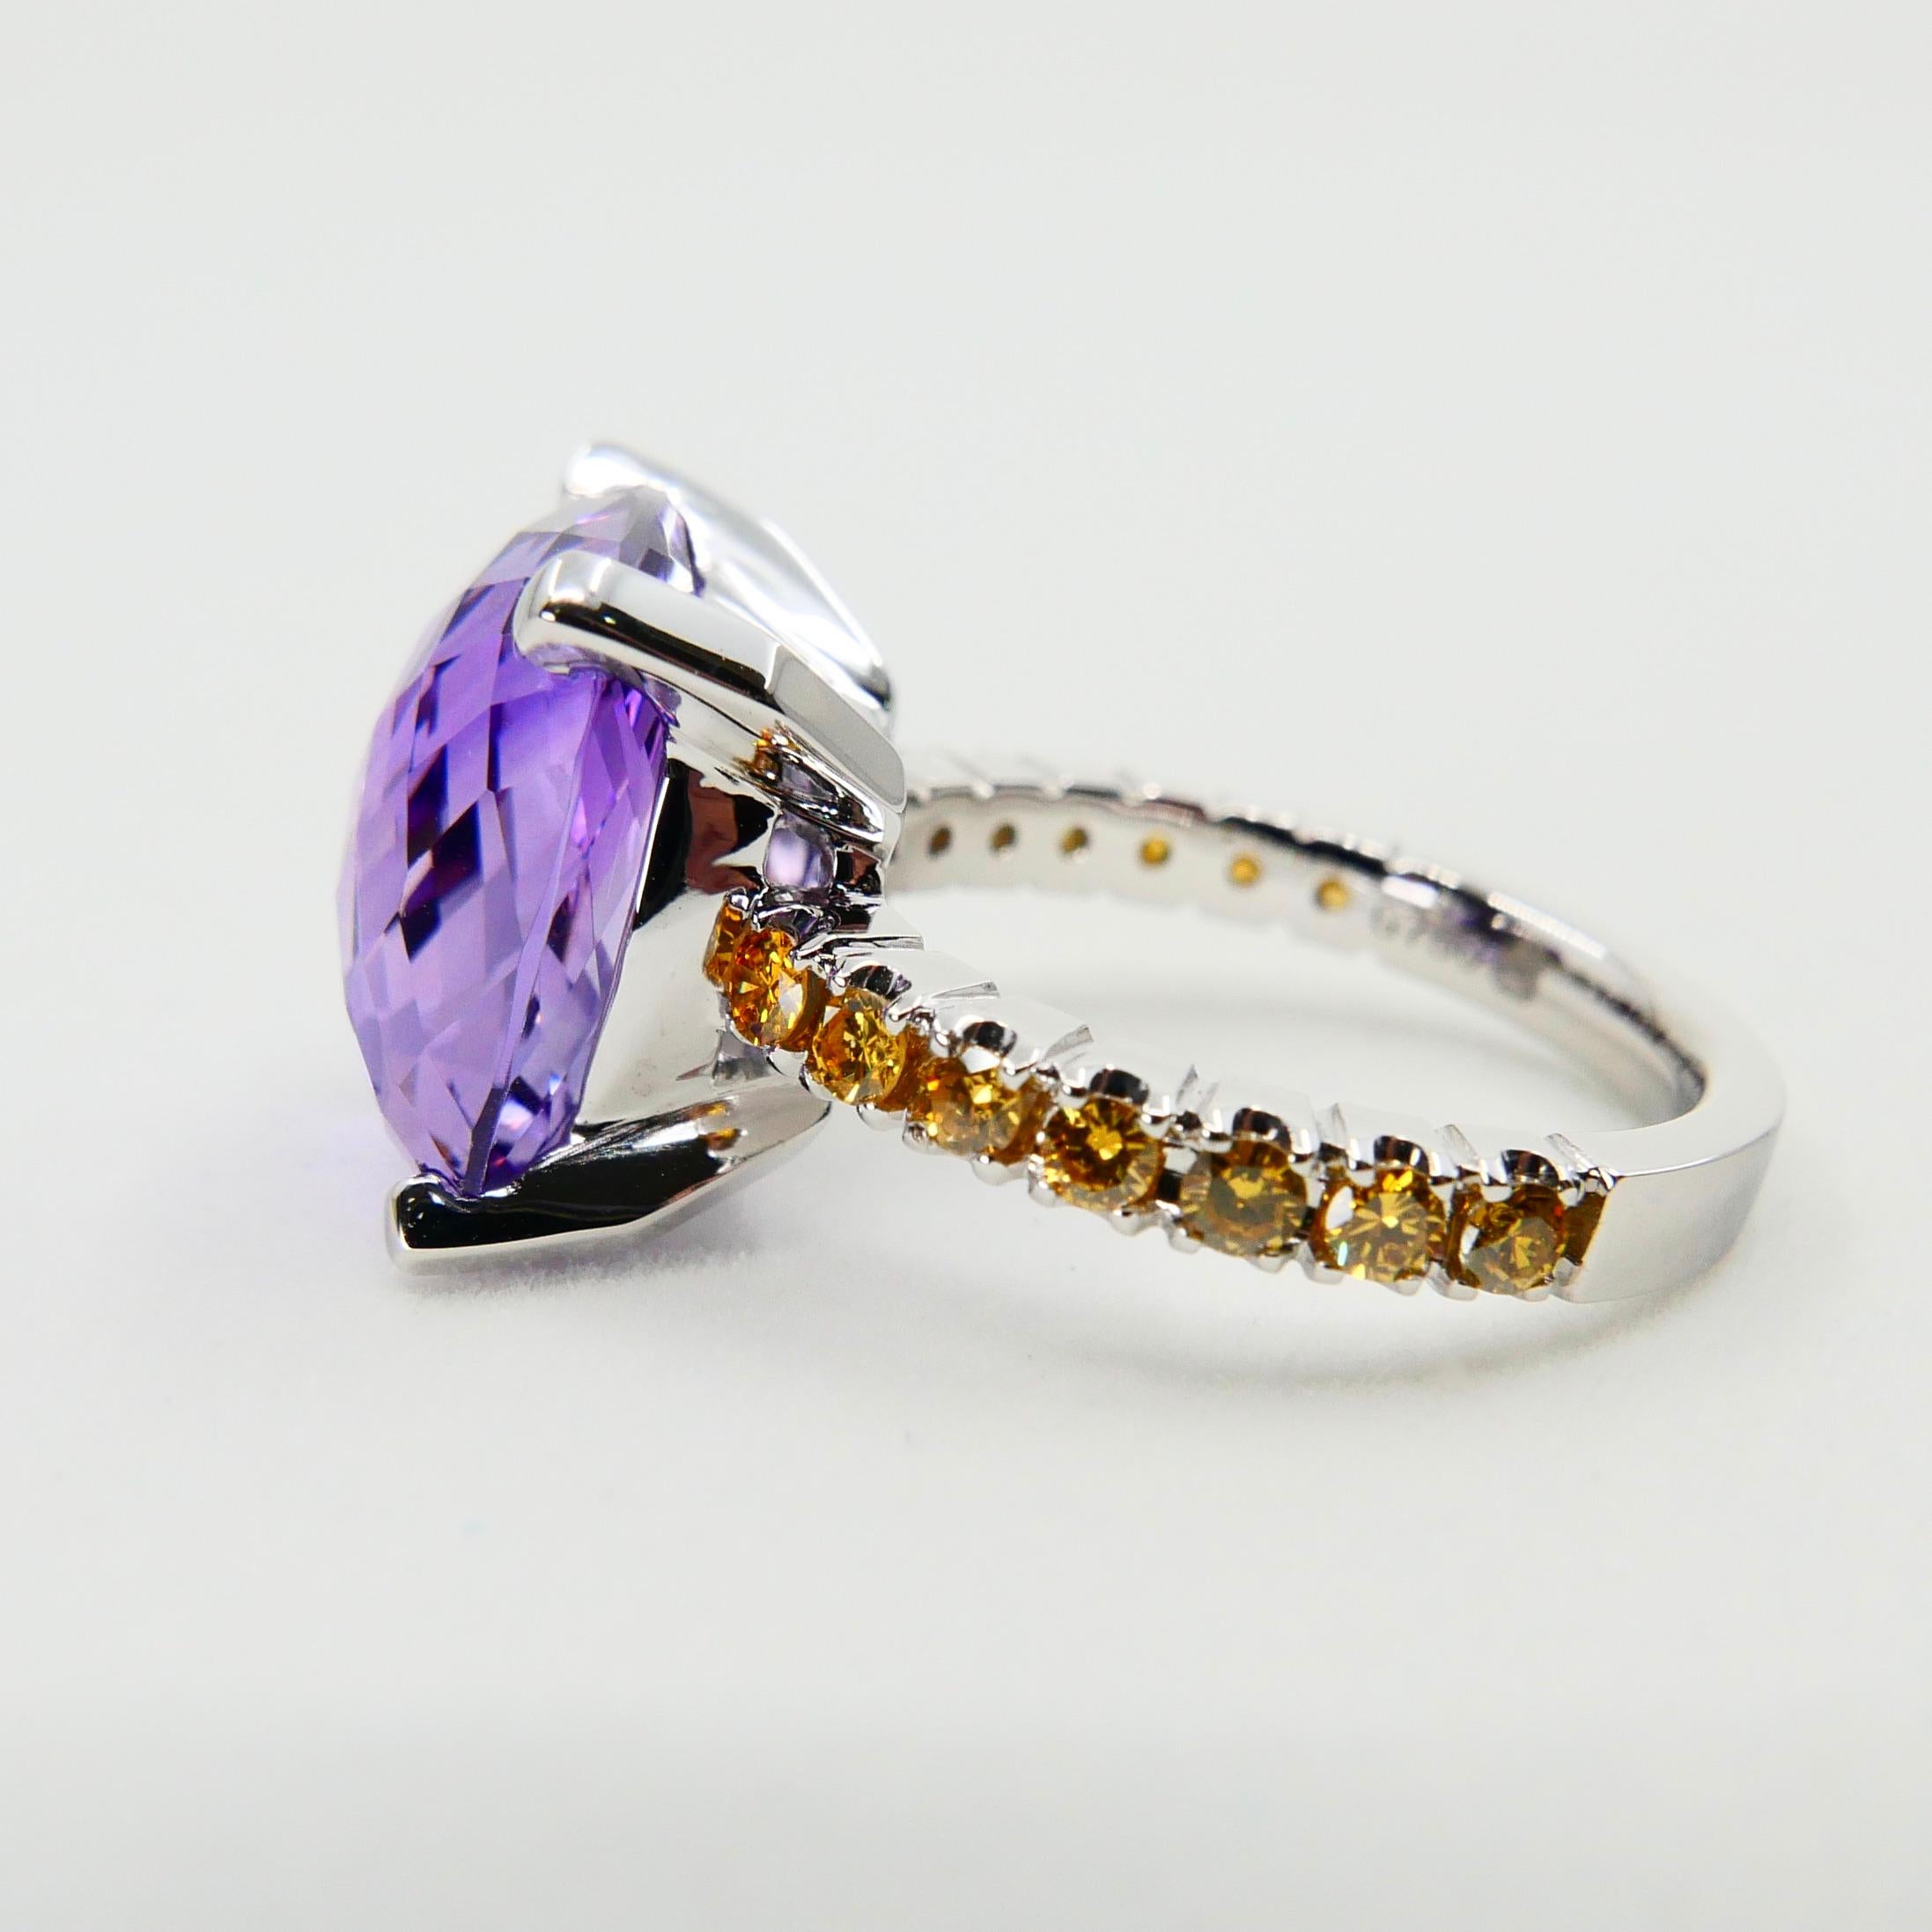 8.70 Carat Amethyst Cocktail Ring with Fancy Vivid Yellow Diamonds, Statement For Sale 2